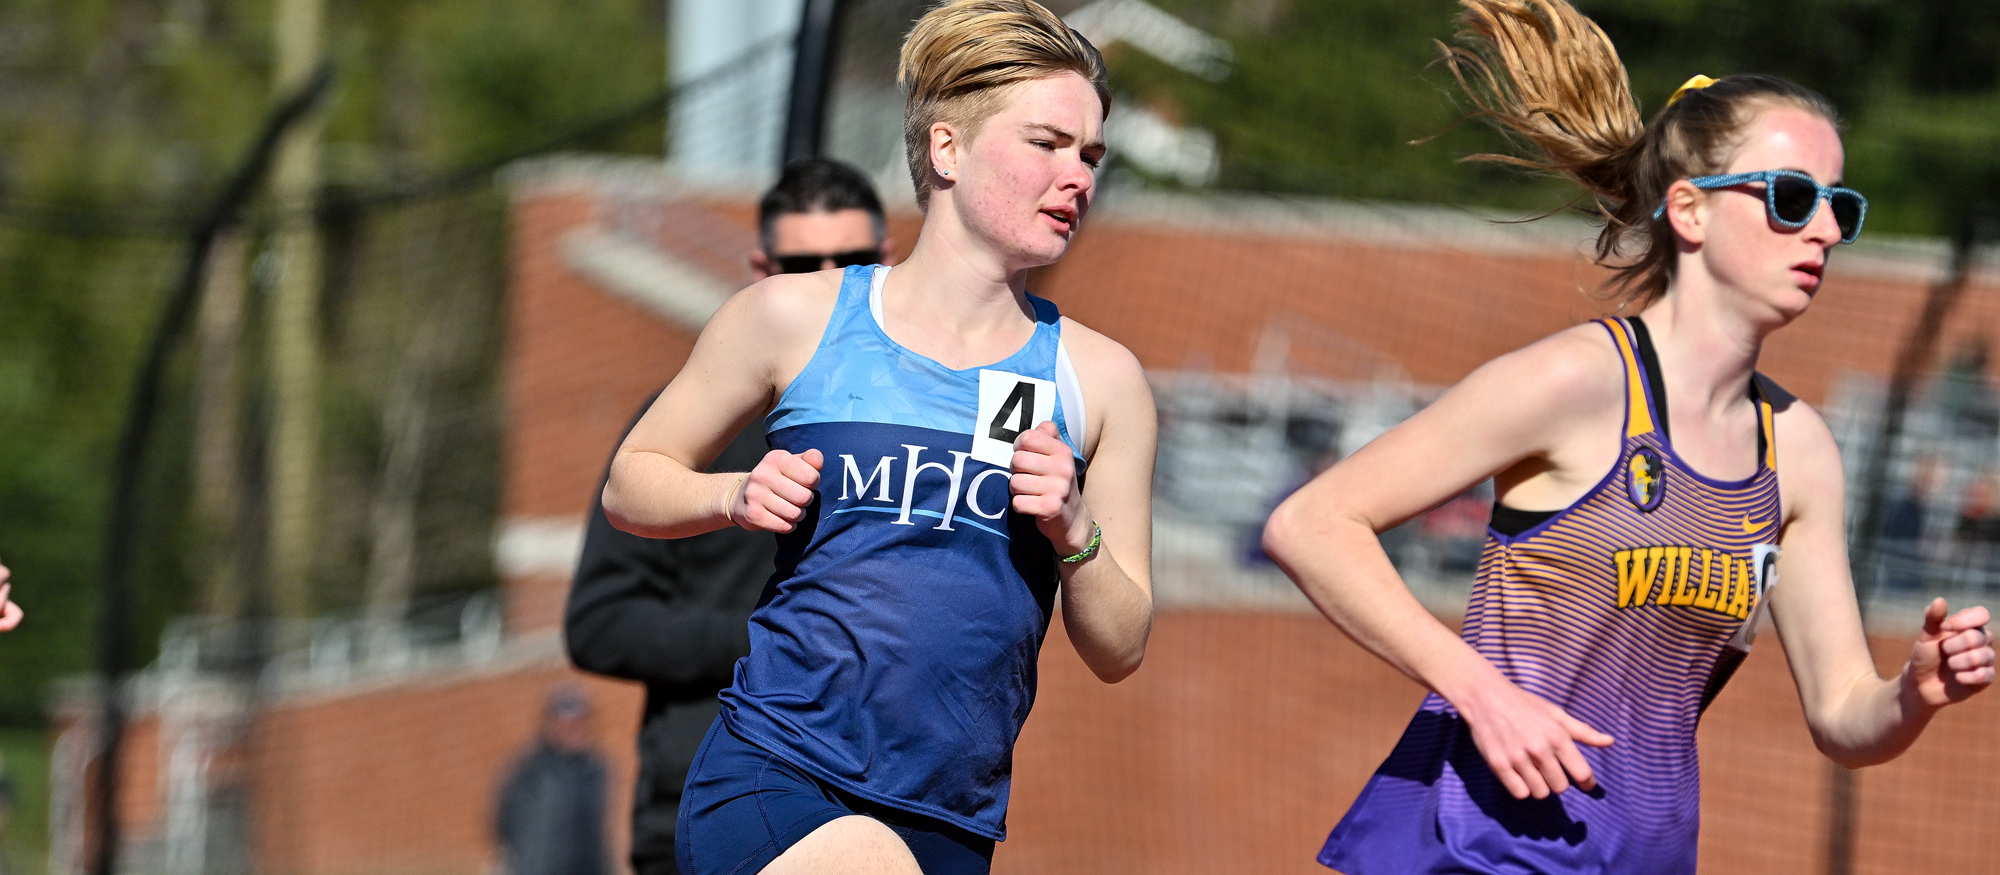 Tessa Lancaster became Mount Holyoke's fifth-fastest performer ever in the outdoor 3,000-meter run with a time of 10:44.35 on March 26, 2023 at the Wesleyan Swanson Classic. (RJB Sports file photo)